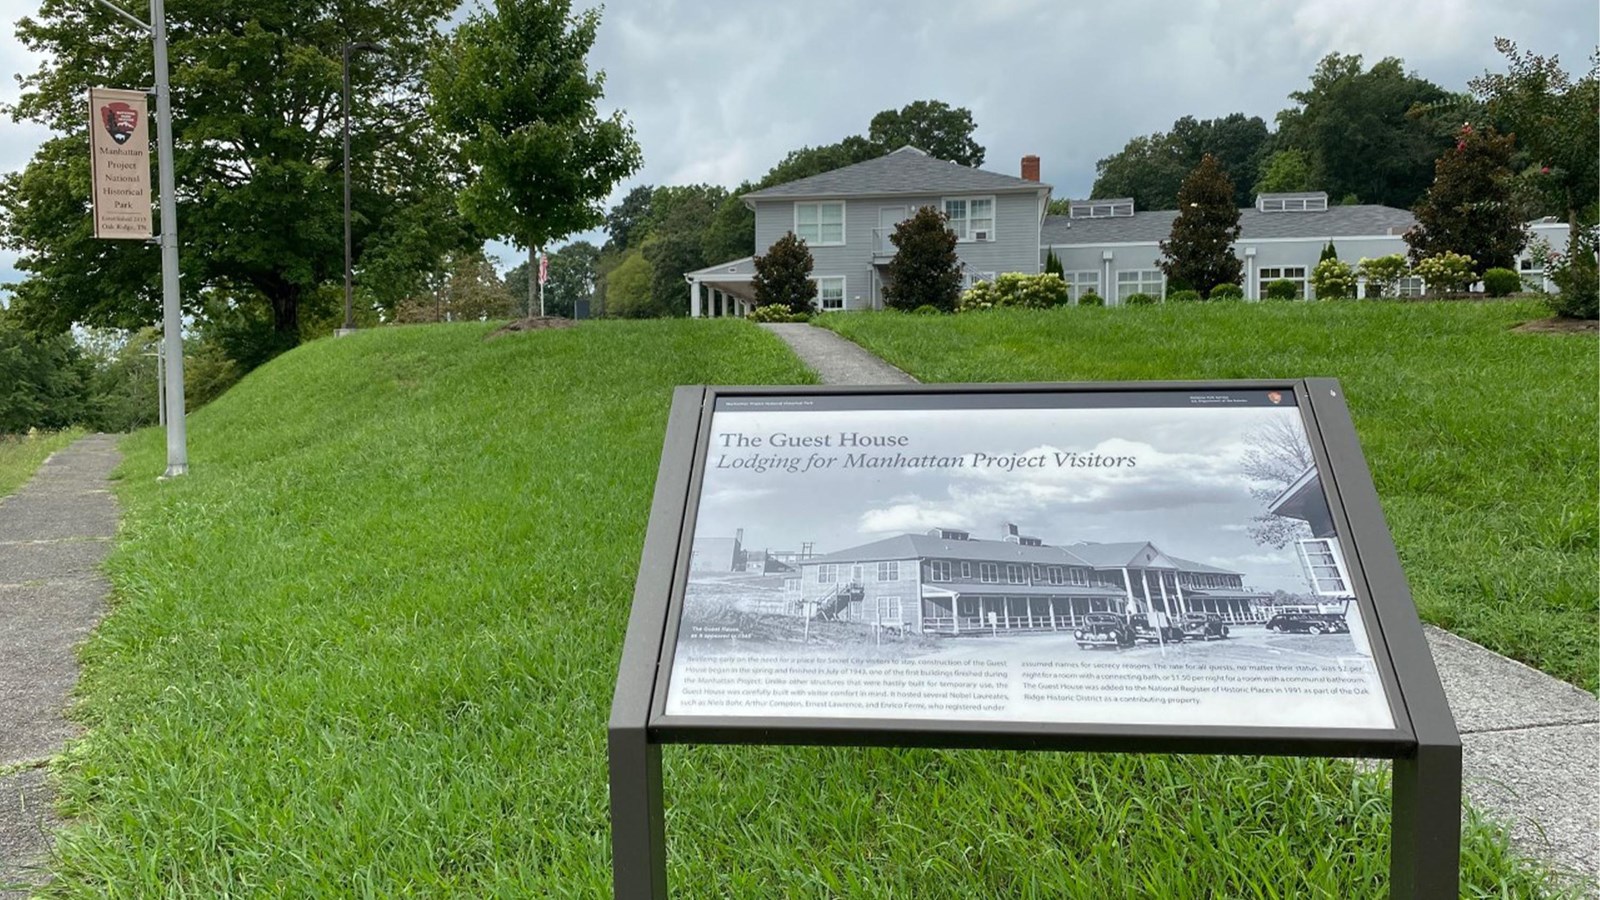 A large gray hotel-type building on a hill with historical marker in foreground